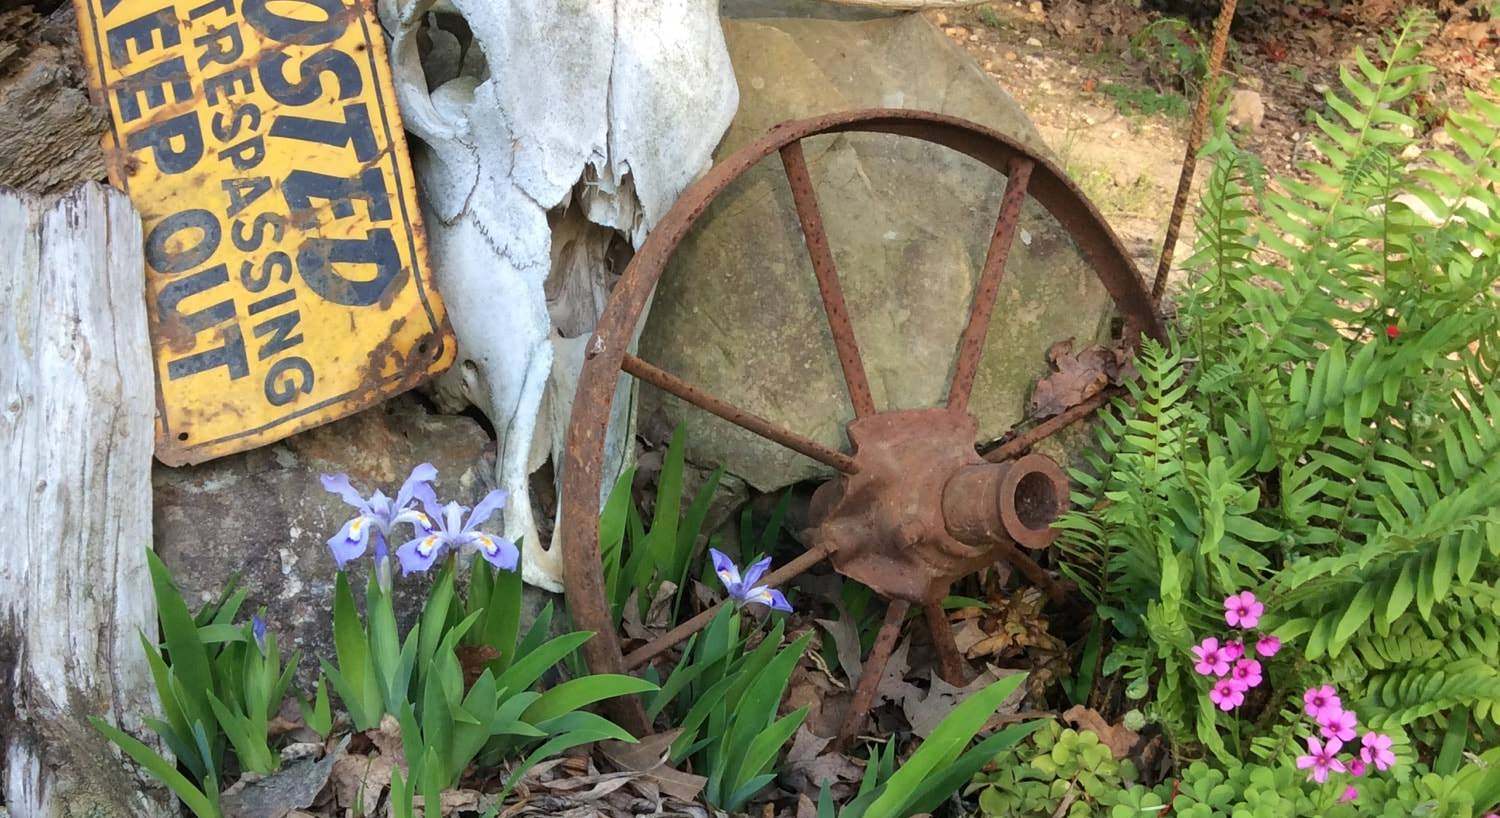 gLandscaped flowers with rocks, an animal skeleton, and a rusted no trespassing sign and wagon wheel